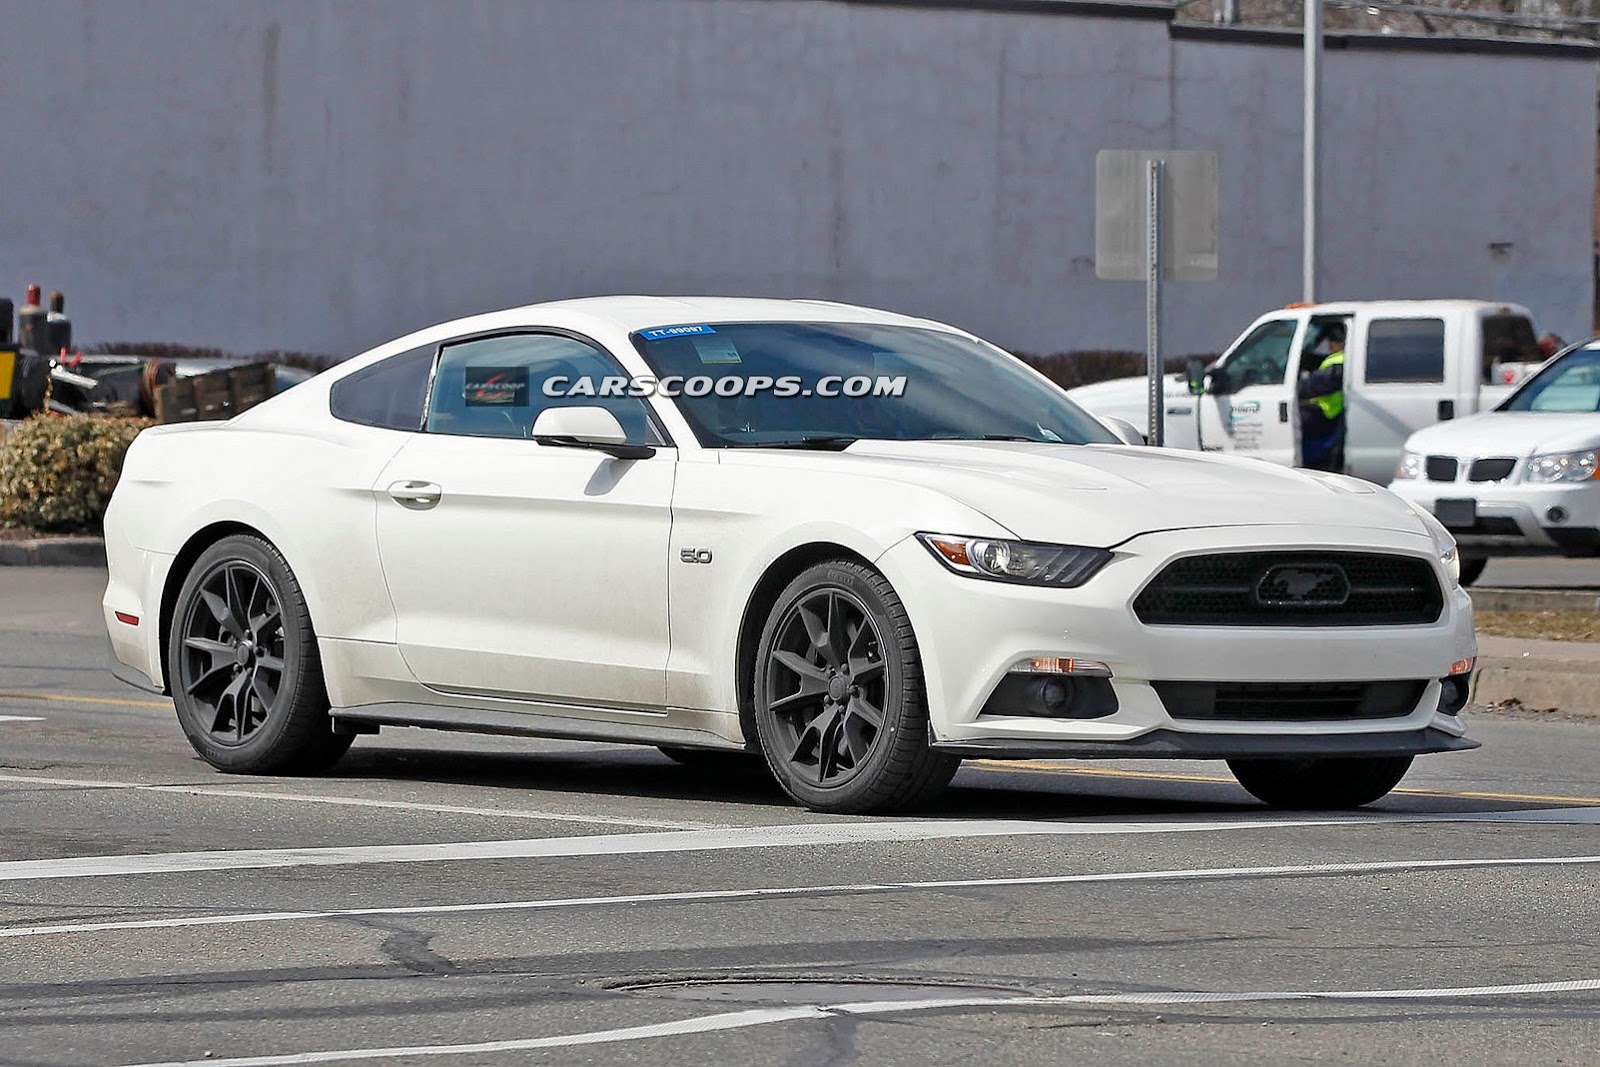 Is This The 2015 Ford Mustang 50th Anniversary? - GTspirit